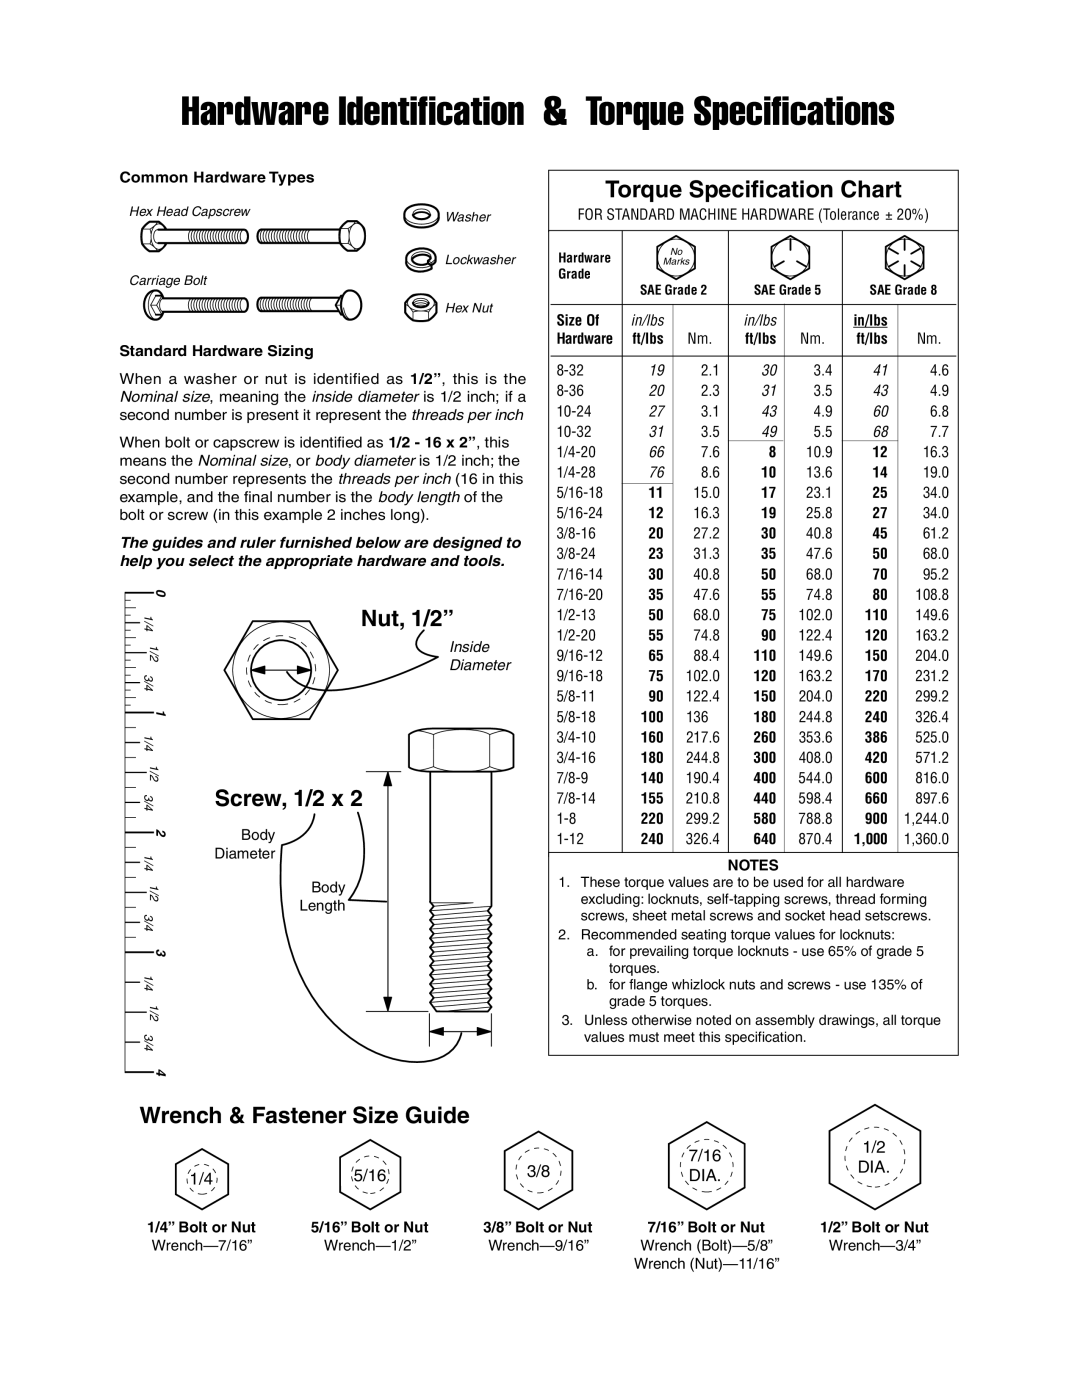 Snapper 4545 Wrench & Fastener Size Guide, Common Hardware Types, Standard Hardware Sizing, 1/4” Bolt or Nut, Nut, 1/2” 